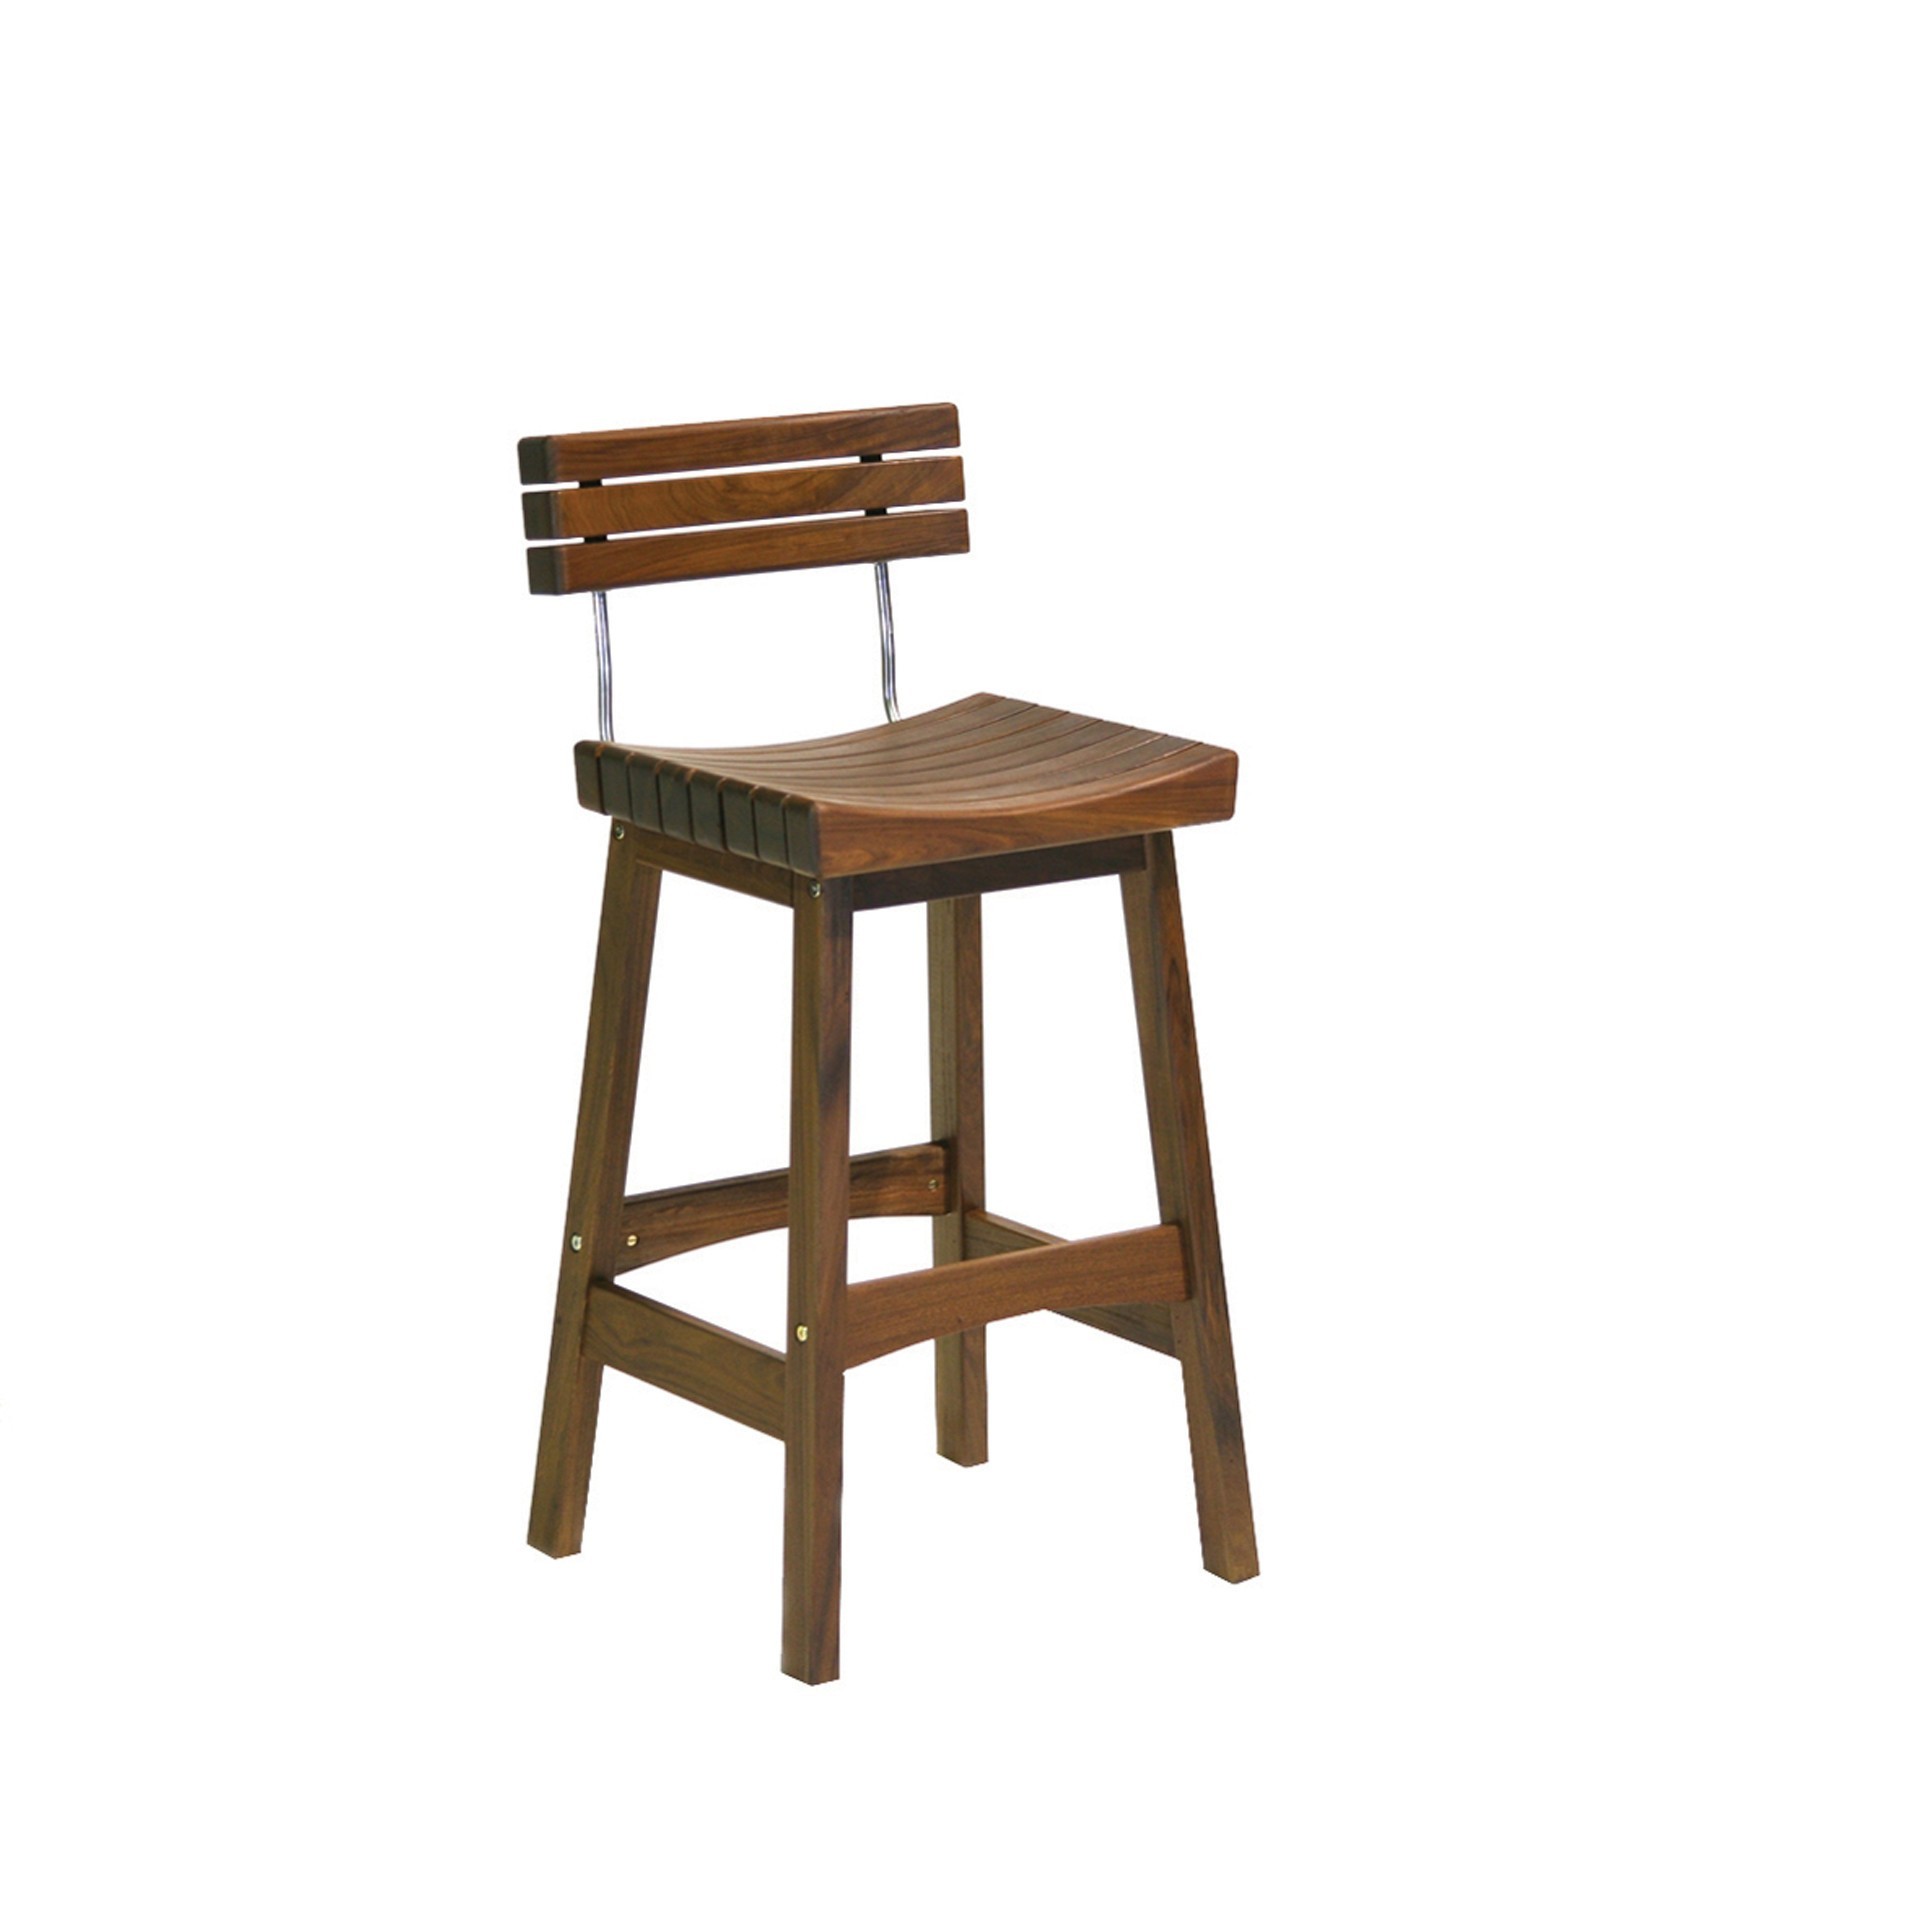 Sunset stool with back from hausers patio luxury outdoor living by hausers patio